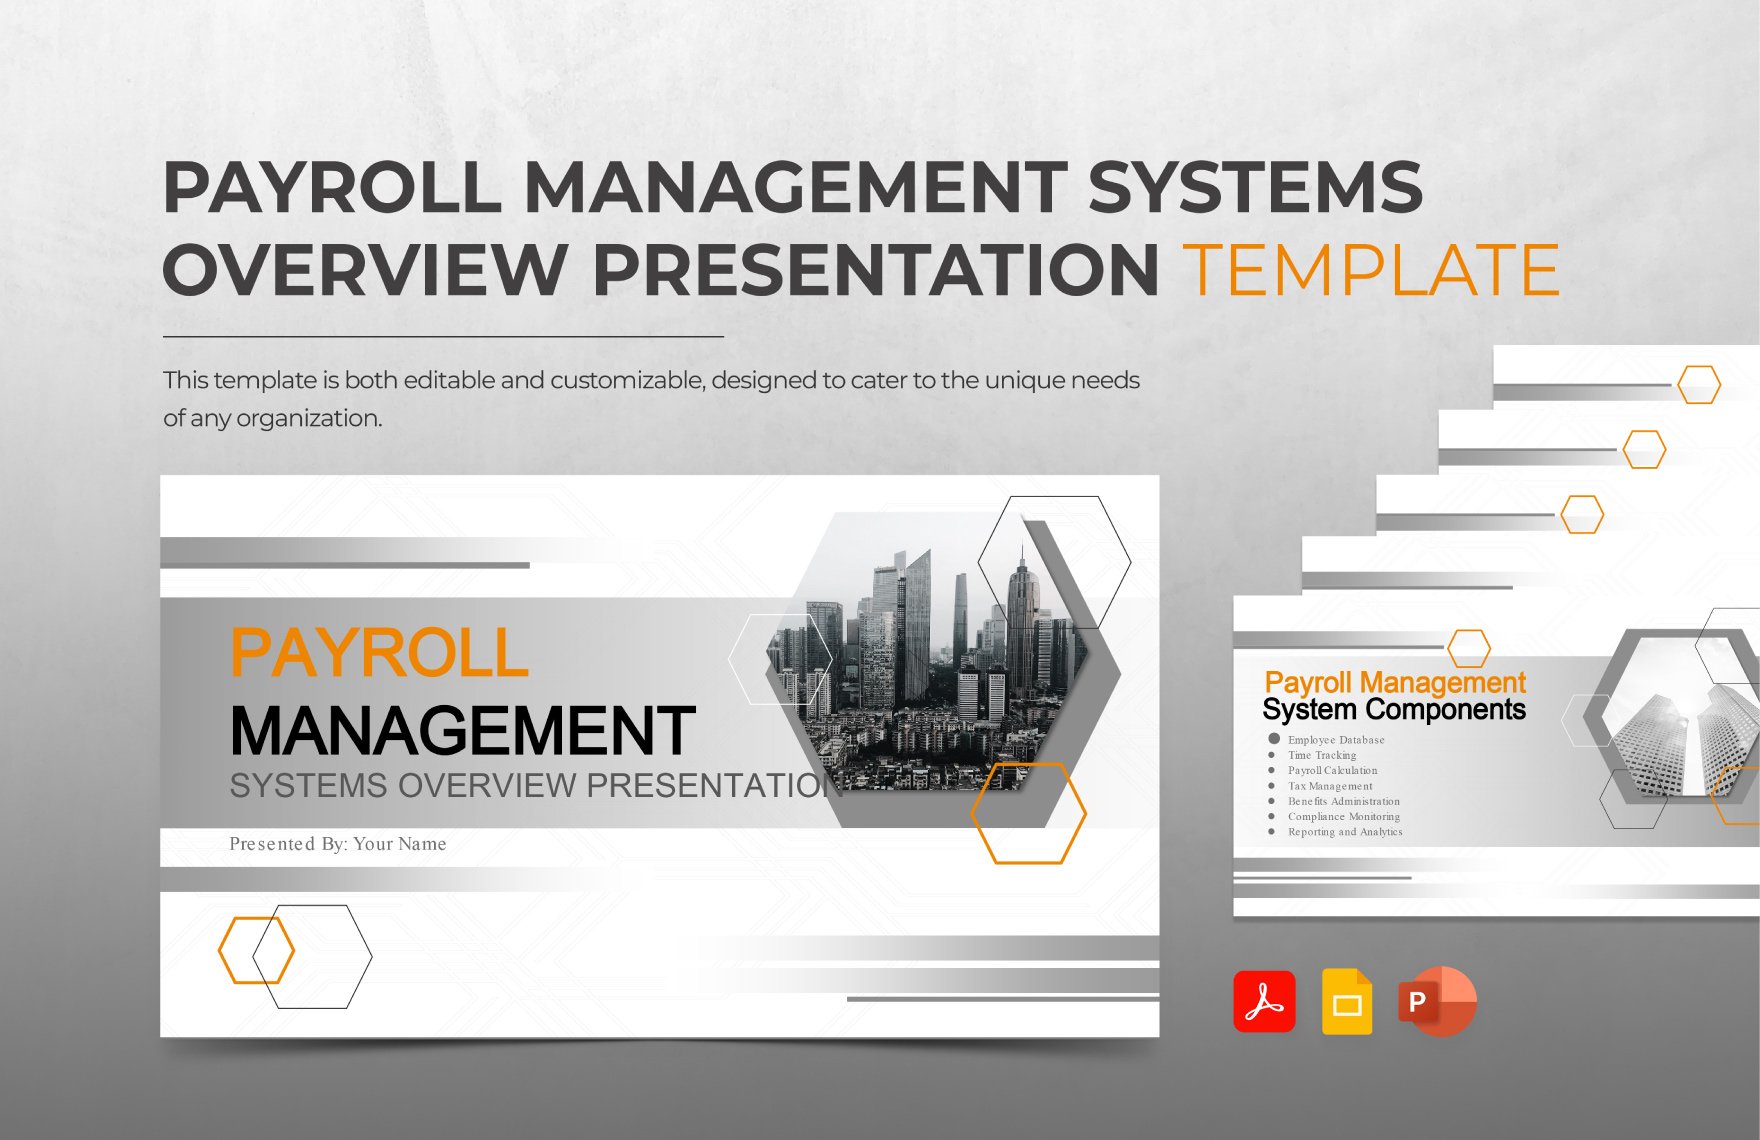 Free Payroll Management Systems Overview Presentation Template